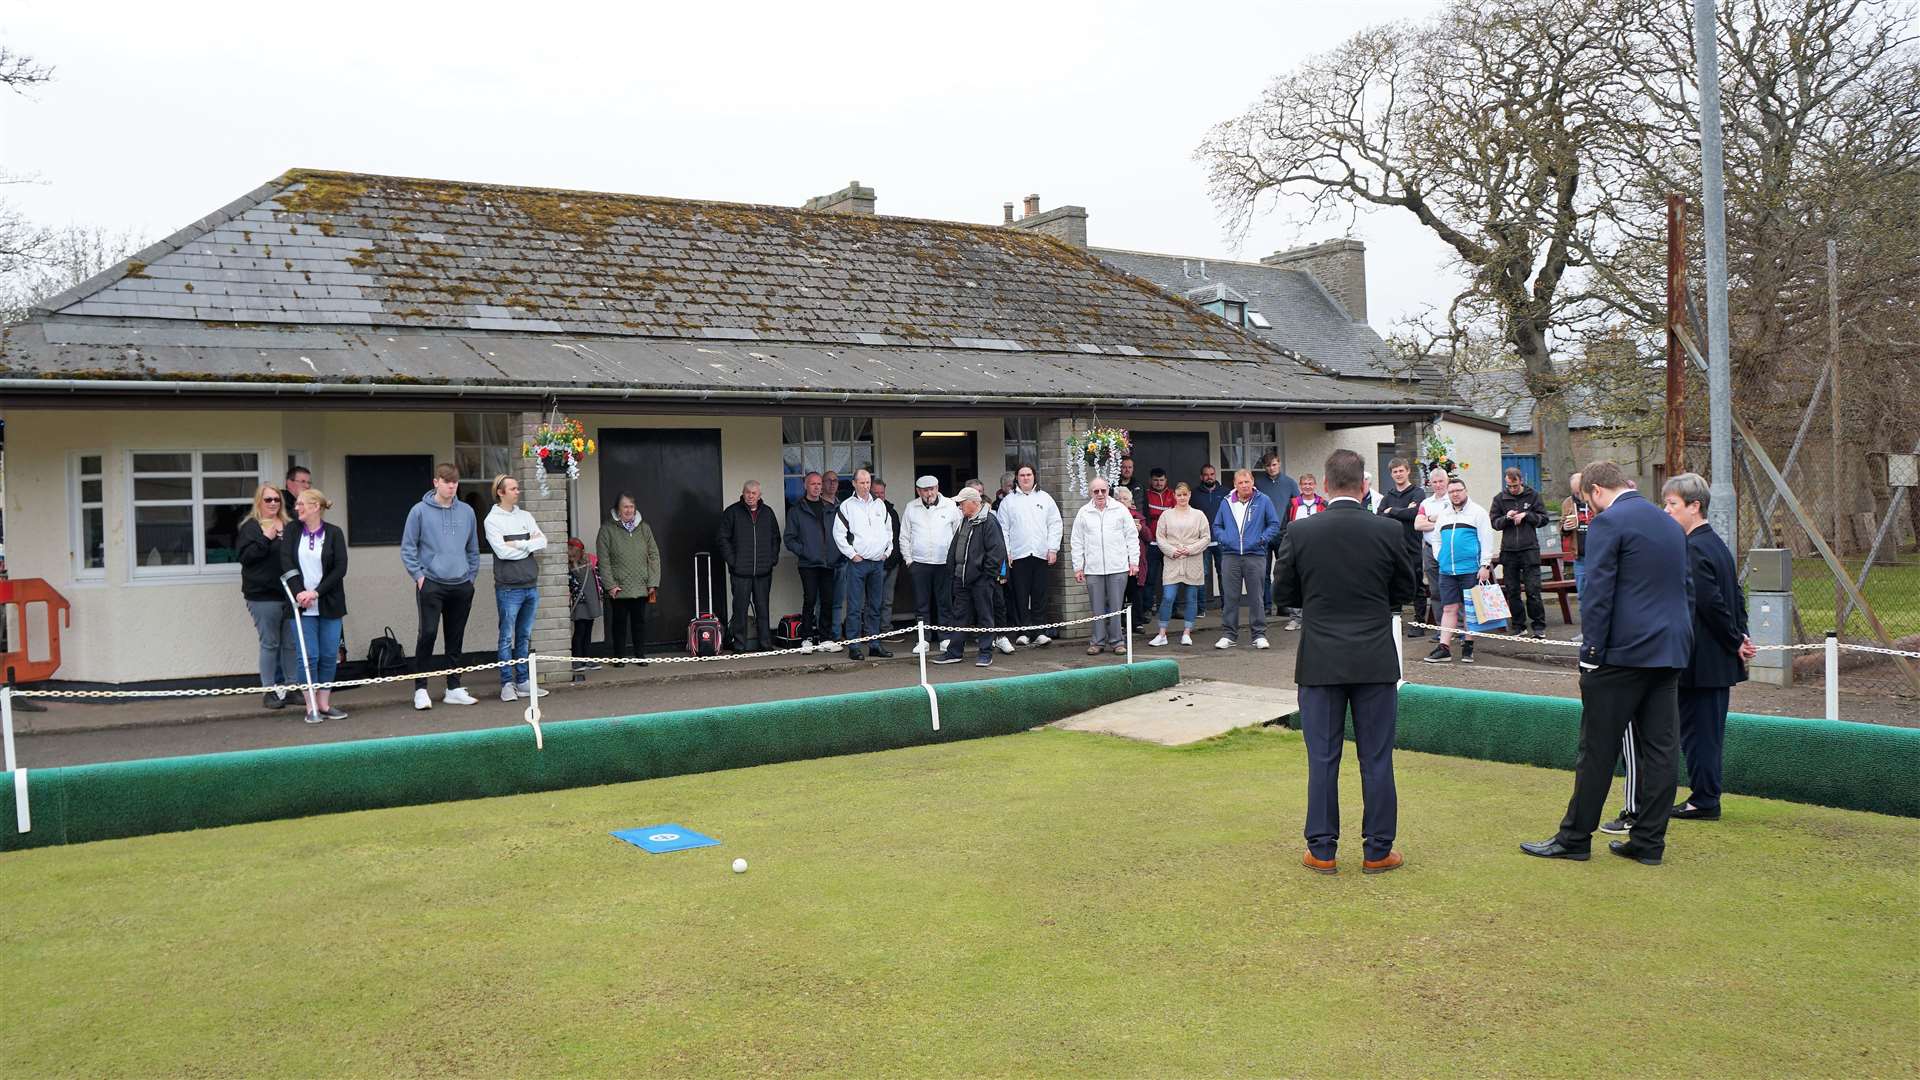 Members of the bowling club turned up for the opening event after a period of downtime due to Covid restrictions. Picture: DGS